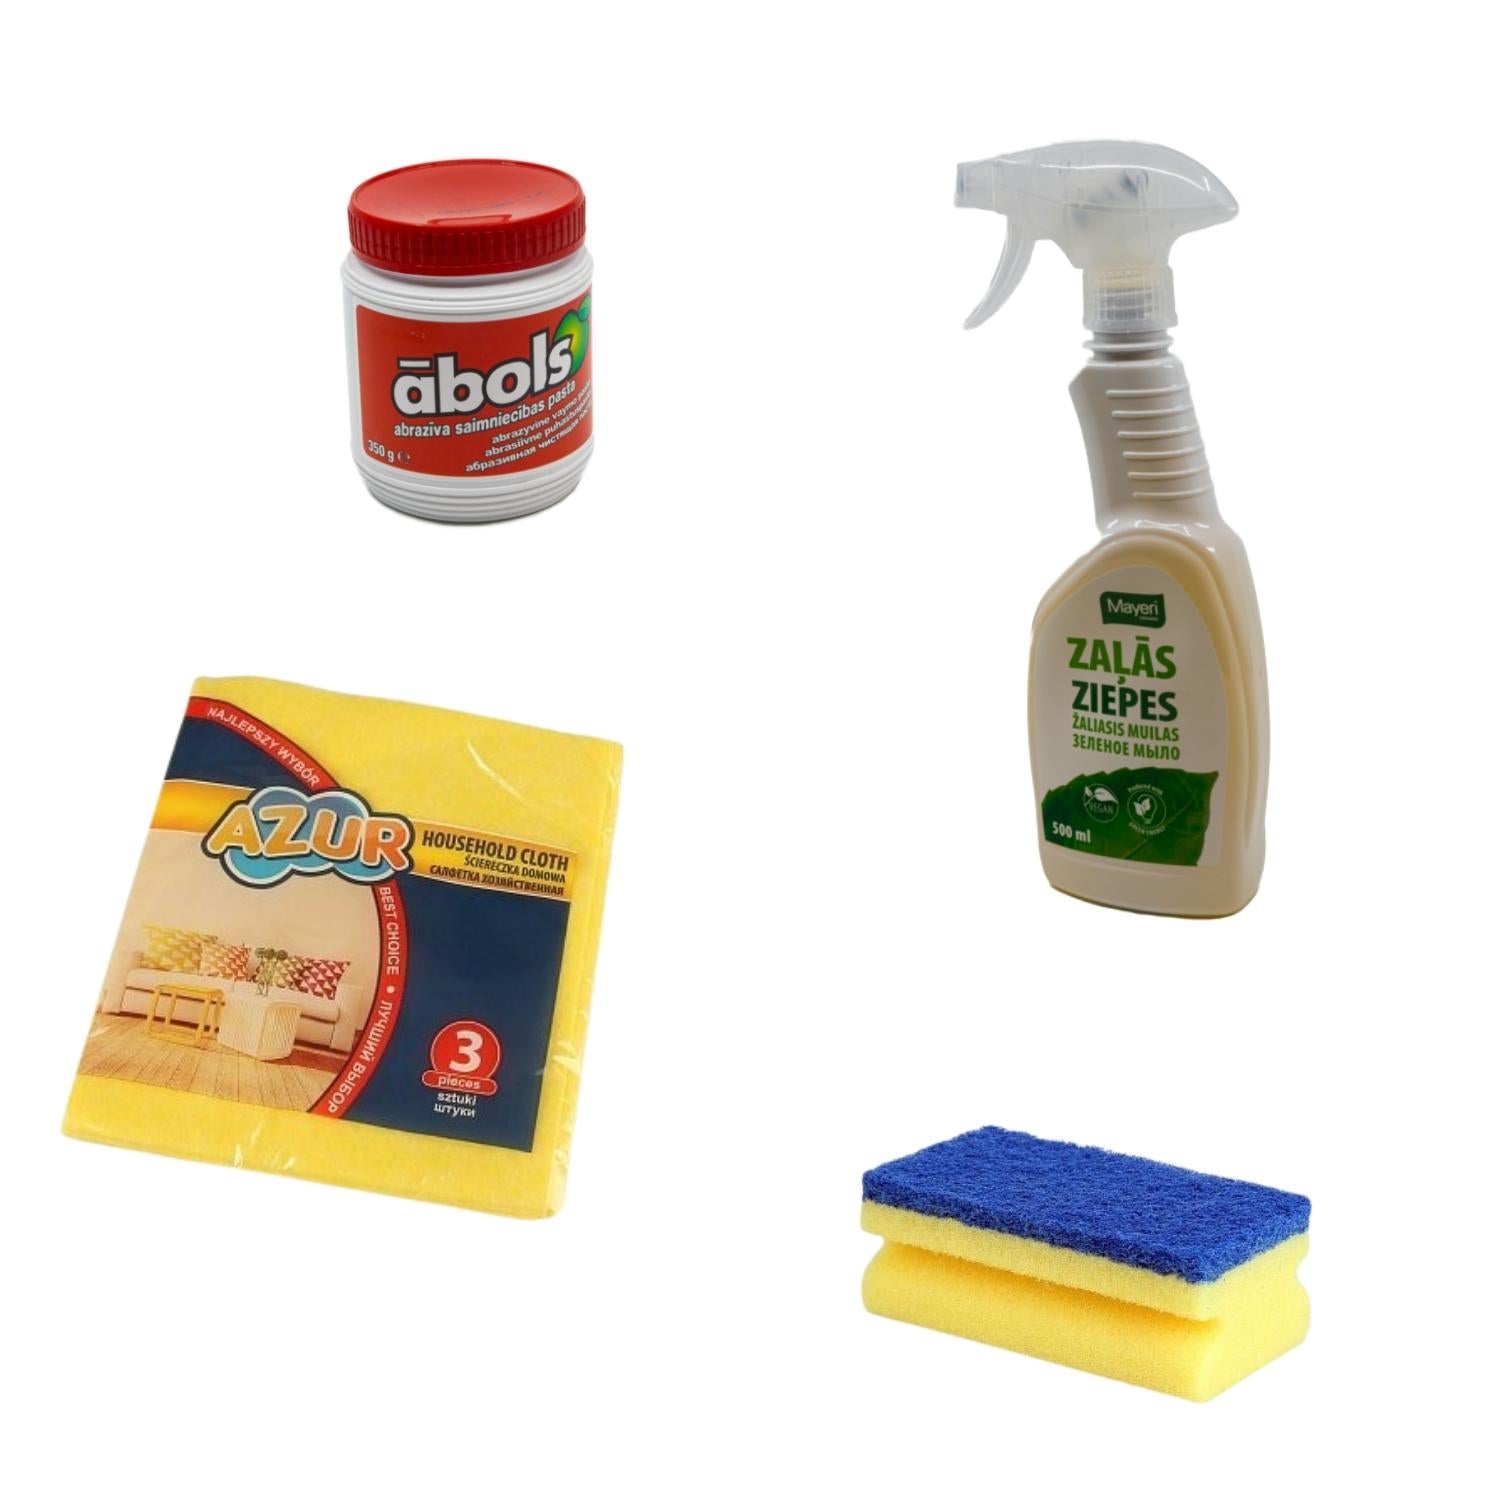 Cleaning products and accessories